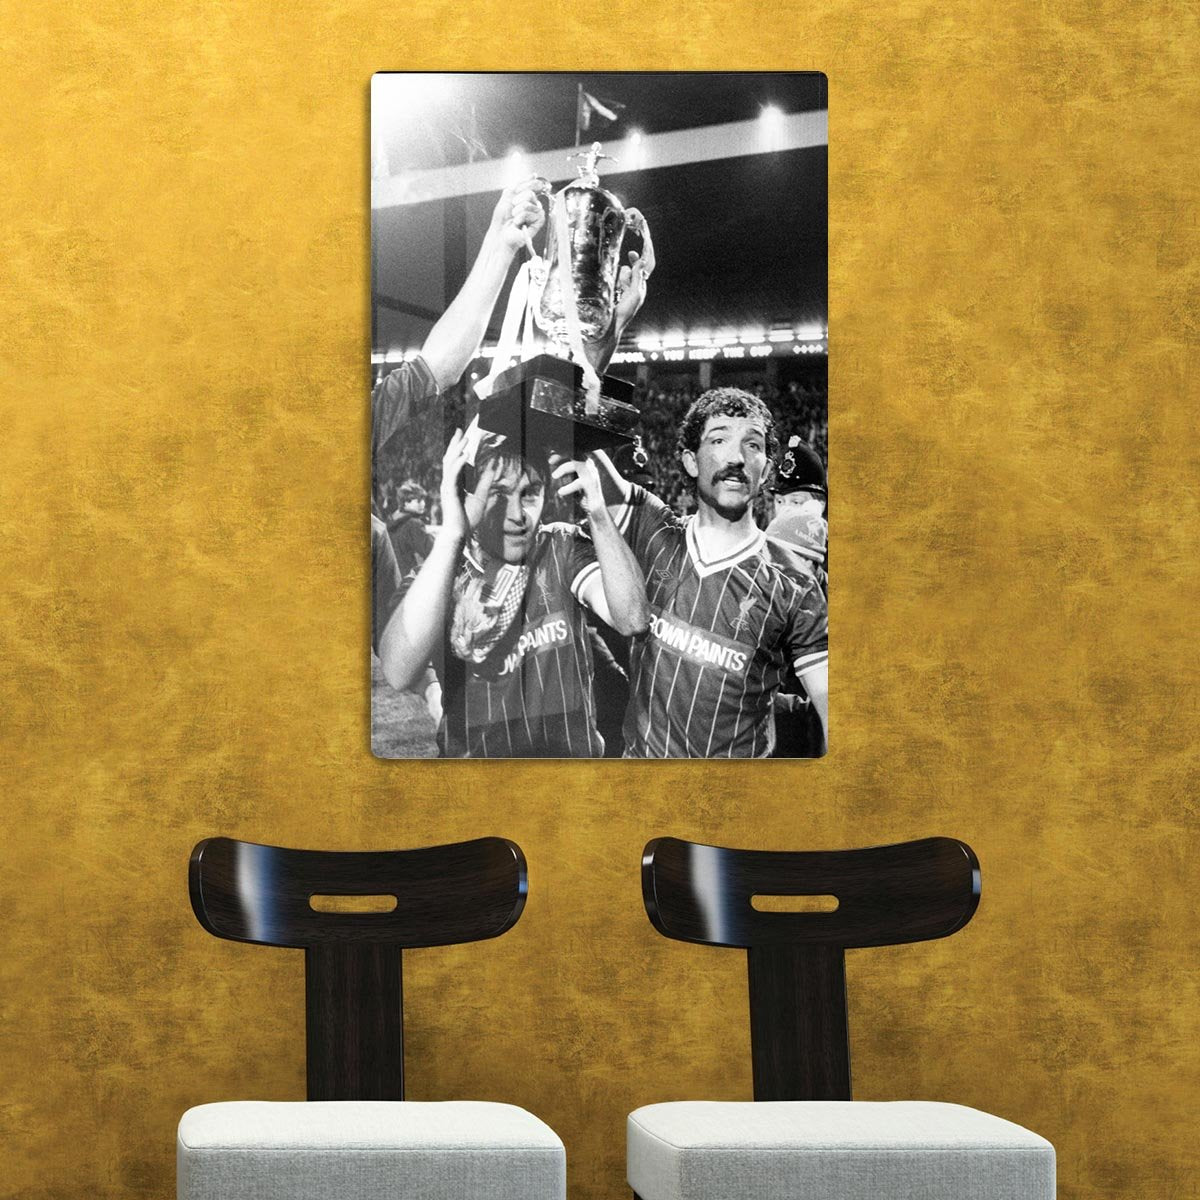 Kenny Dalglish and Graeme Souness with the Milk Cup trophy HD Metal Print - Canvas Art Rocks - 2